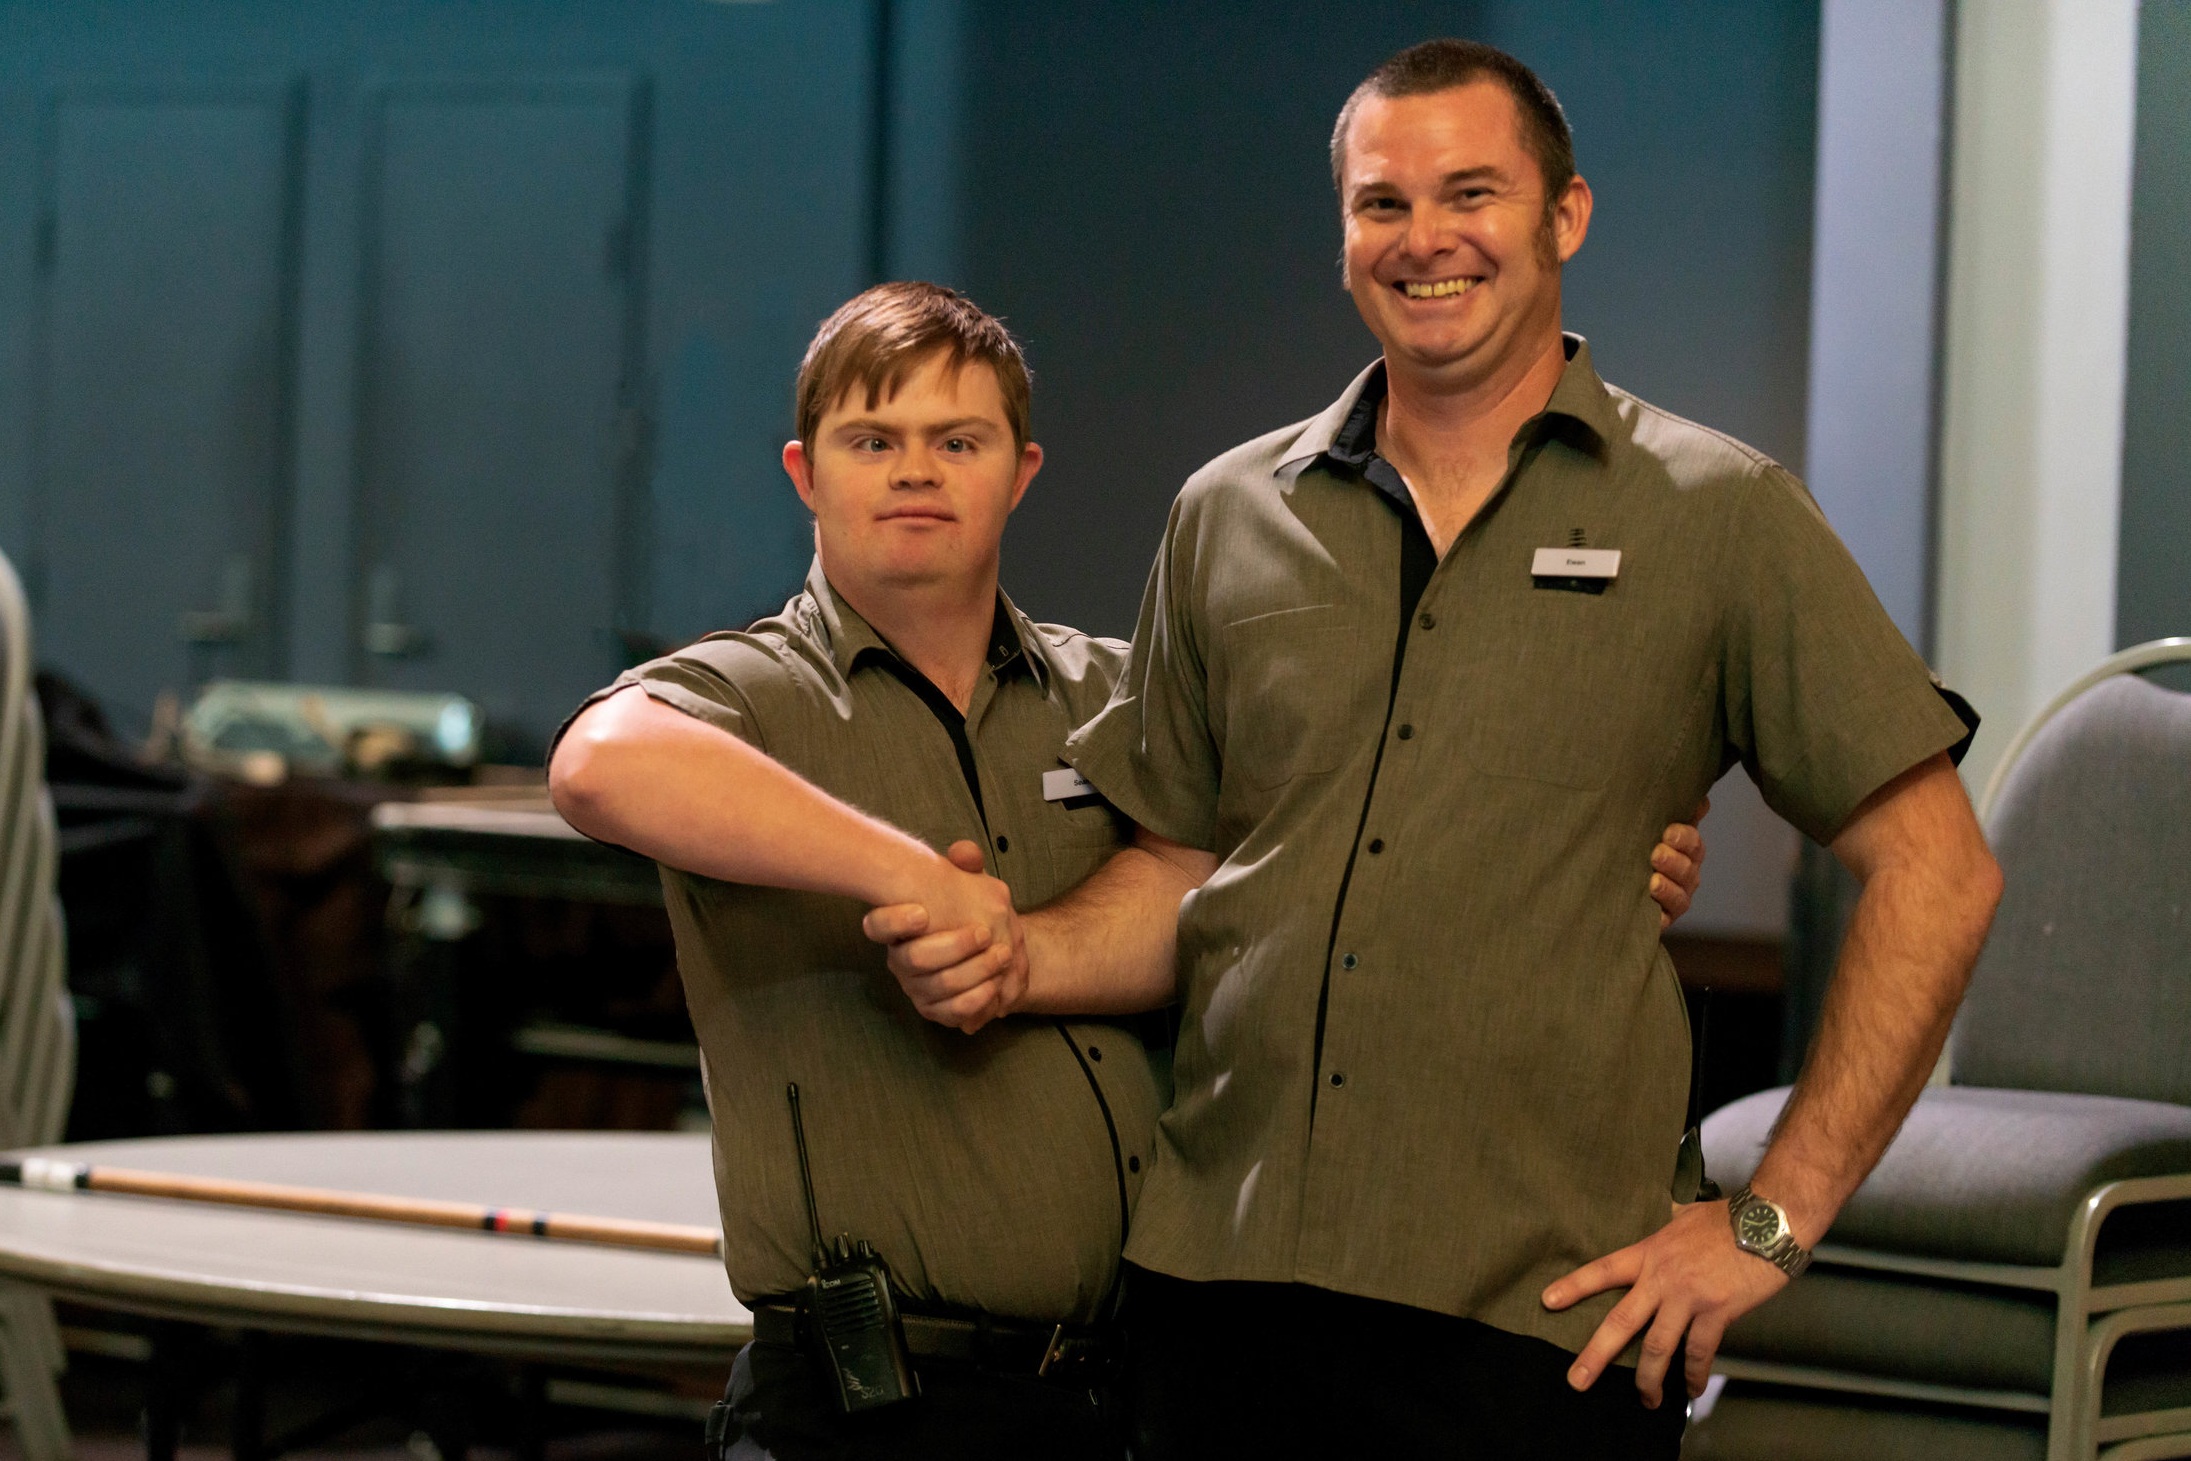  A man with disability and his colleague shaking hands and smiling.  They wearing uniforms for the Brisbane Convention center and surrounded by the equipment they need for work. 